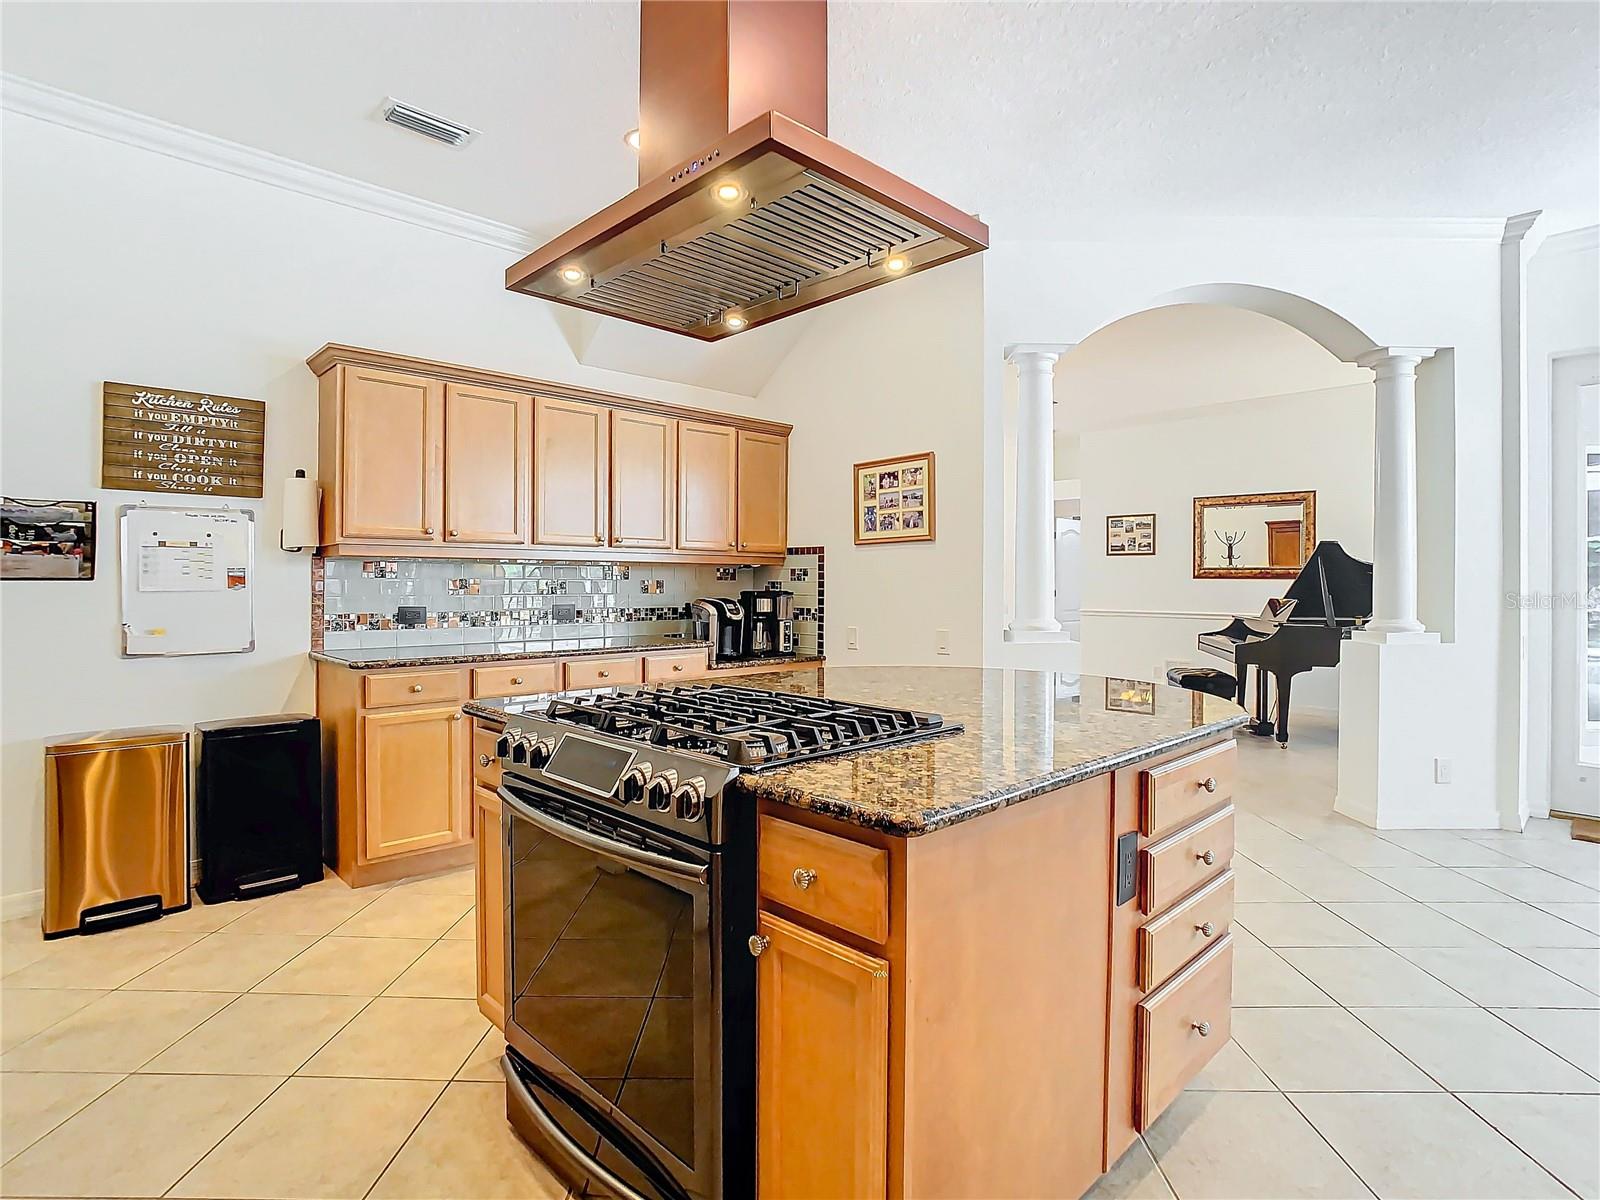 Gourmet top of the line kitchen Many cabinets and some have pull ot shelving appliances, gas range!  Granite counter tops